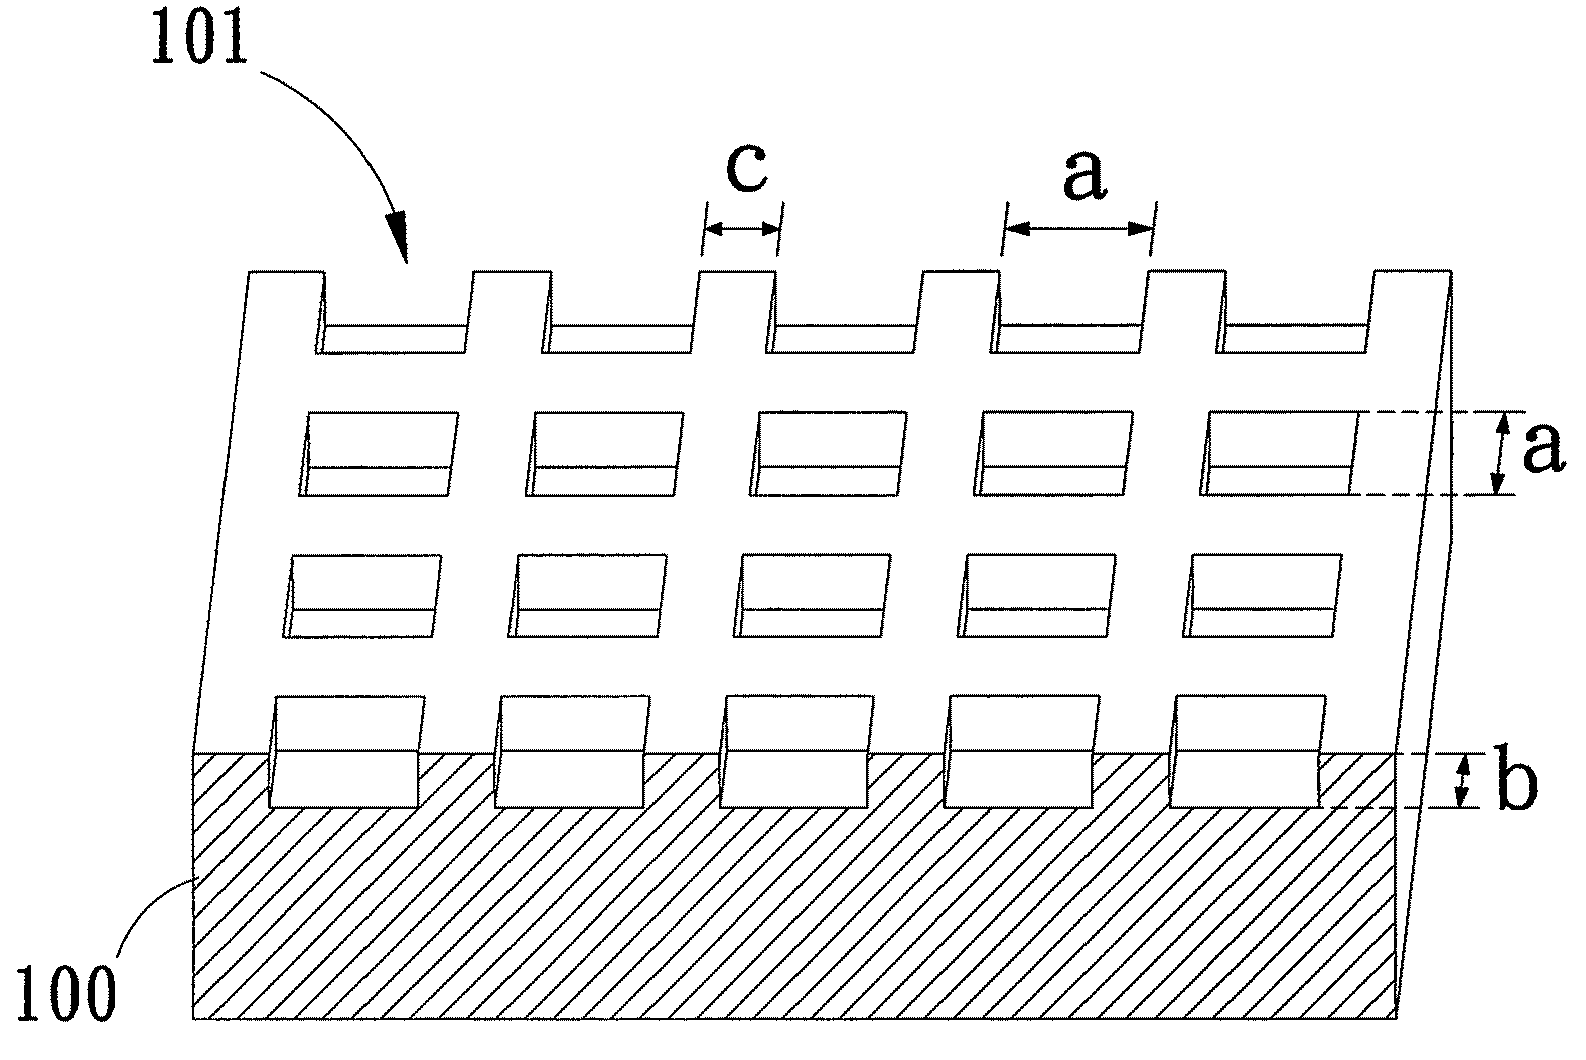 Nano-hole array in conductor element for improving the contact conductance